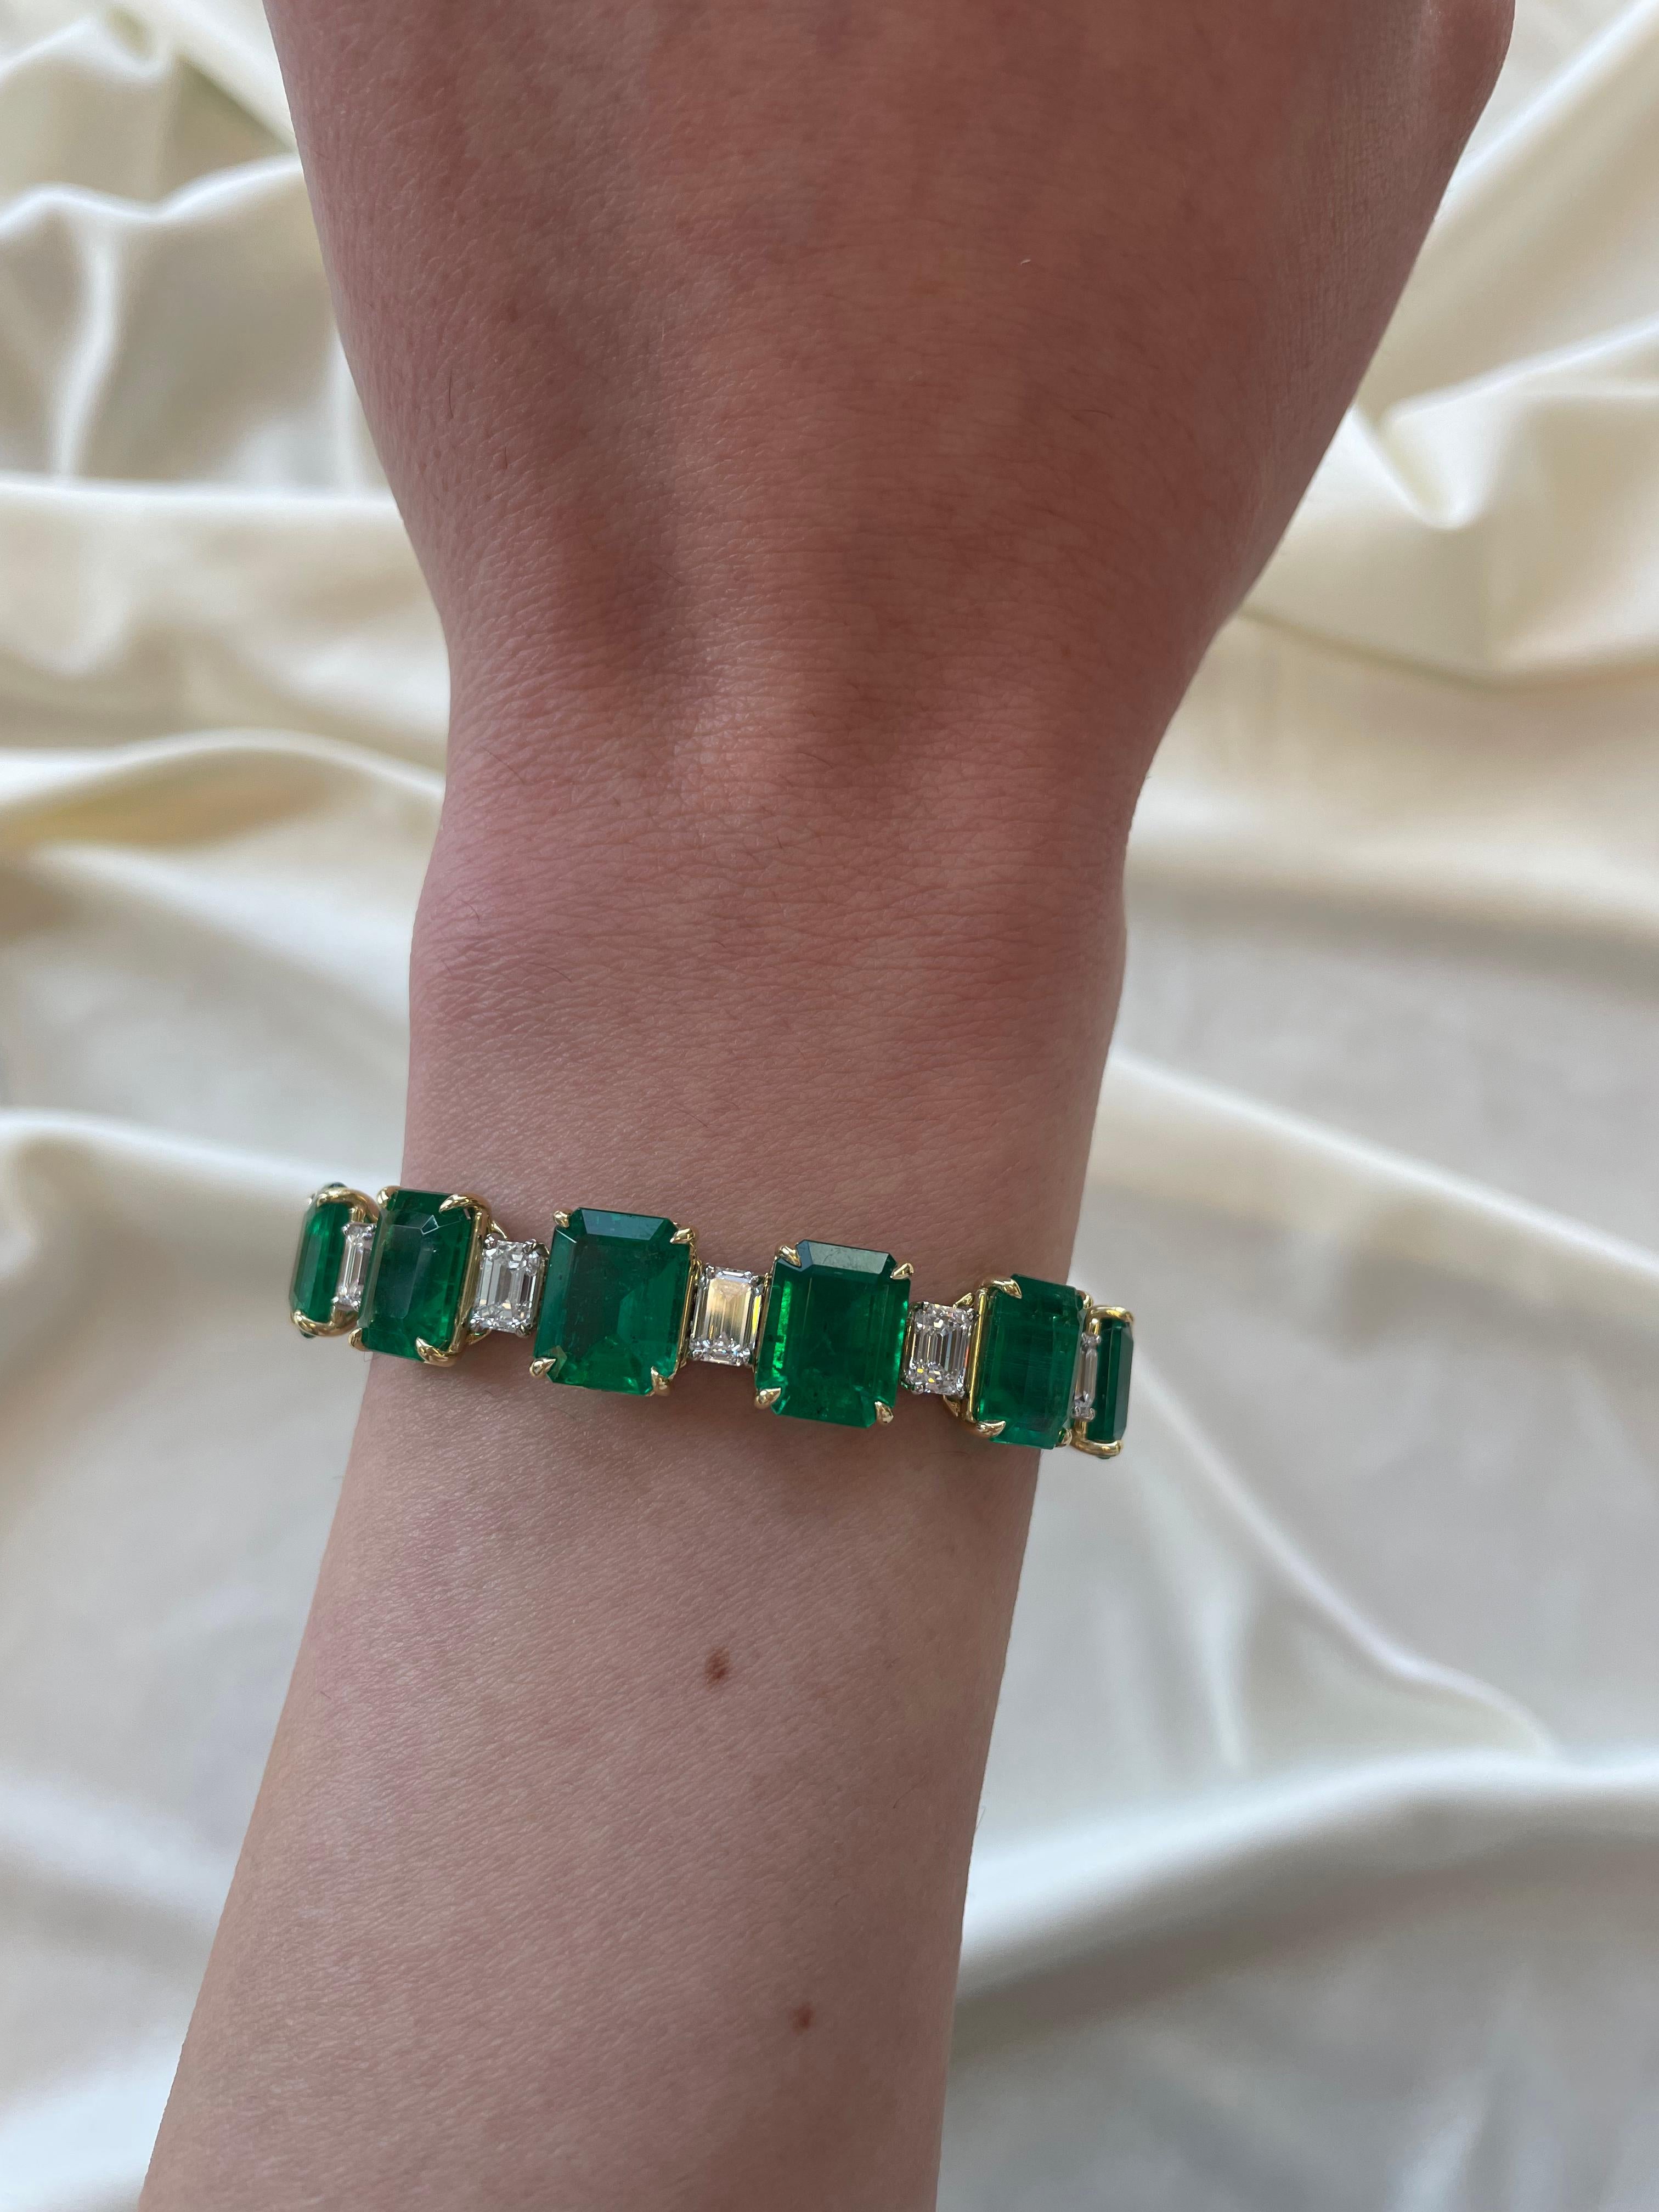 Exceptional and important modern emerald cut emerald and emerald cut diamond tennis bracelet, C. Dunaigre certified. High jewelry by Alexander Beverly Hills.
44.78 carat total diamond weight. 
15 square emerald cut emeralds, 37.03 carats. 15 emerald